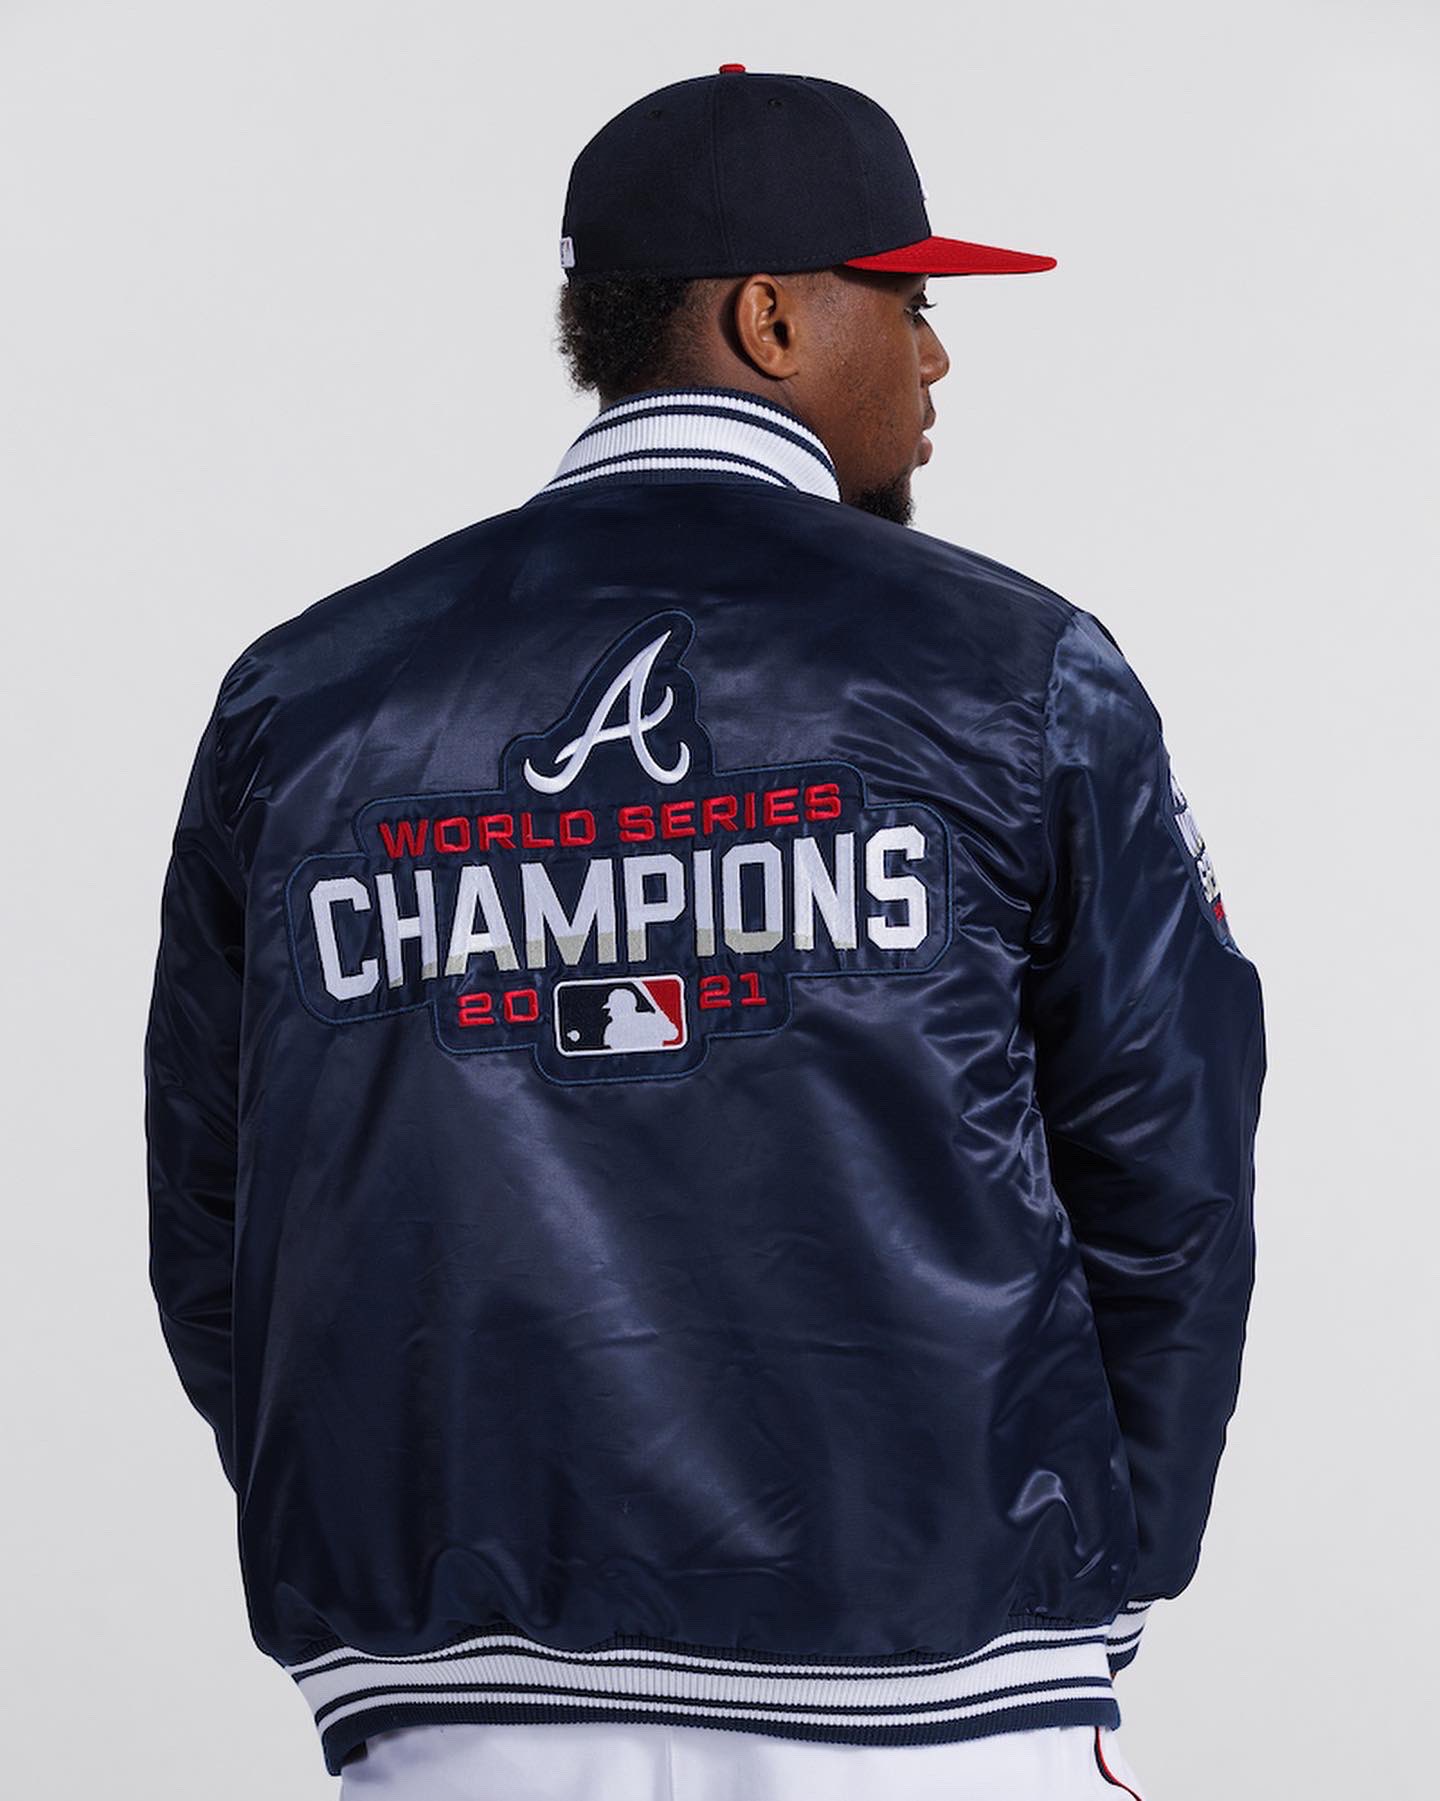 Braves Retail on X: We're back. WS Champs Starter Jackets: $175